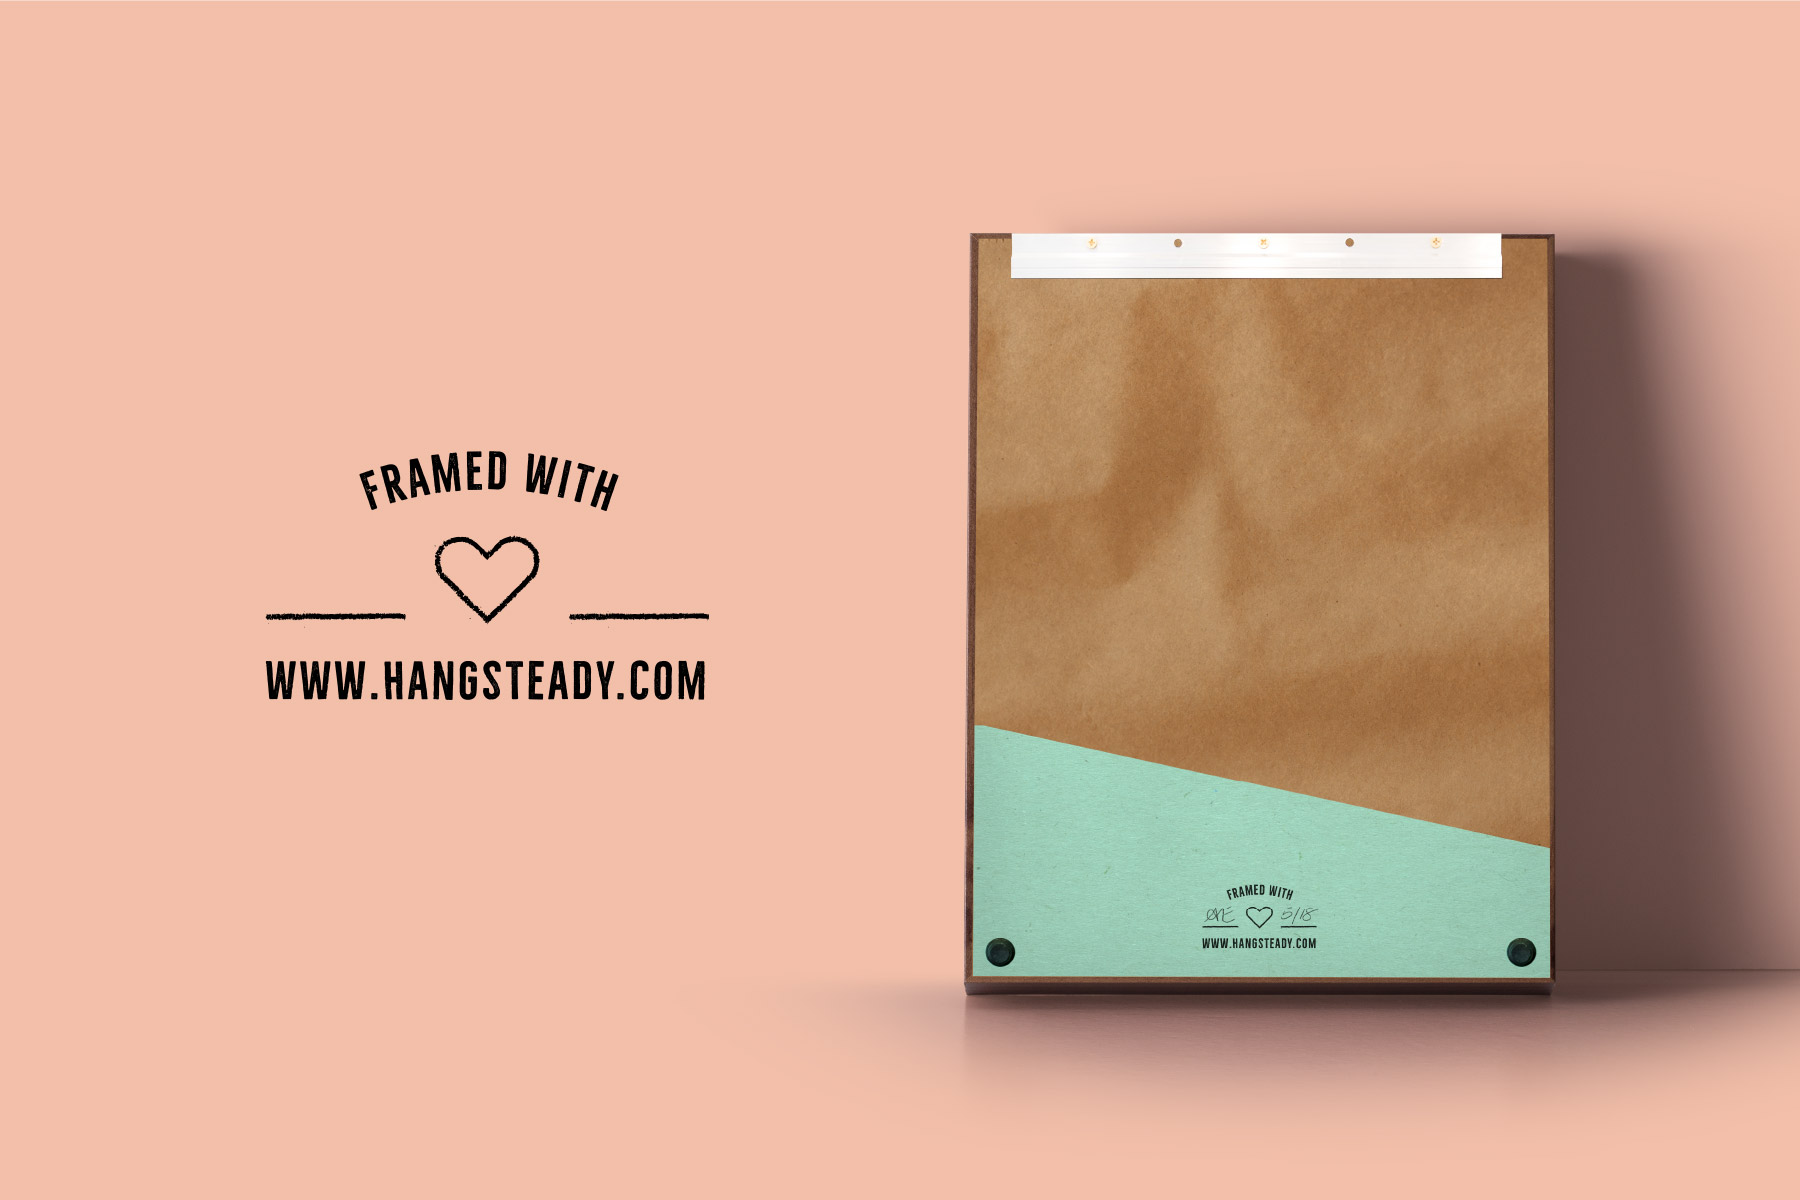 Web ad to promote Hang Steady company website featuring a packaged picture frame